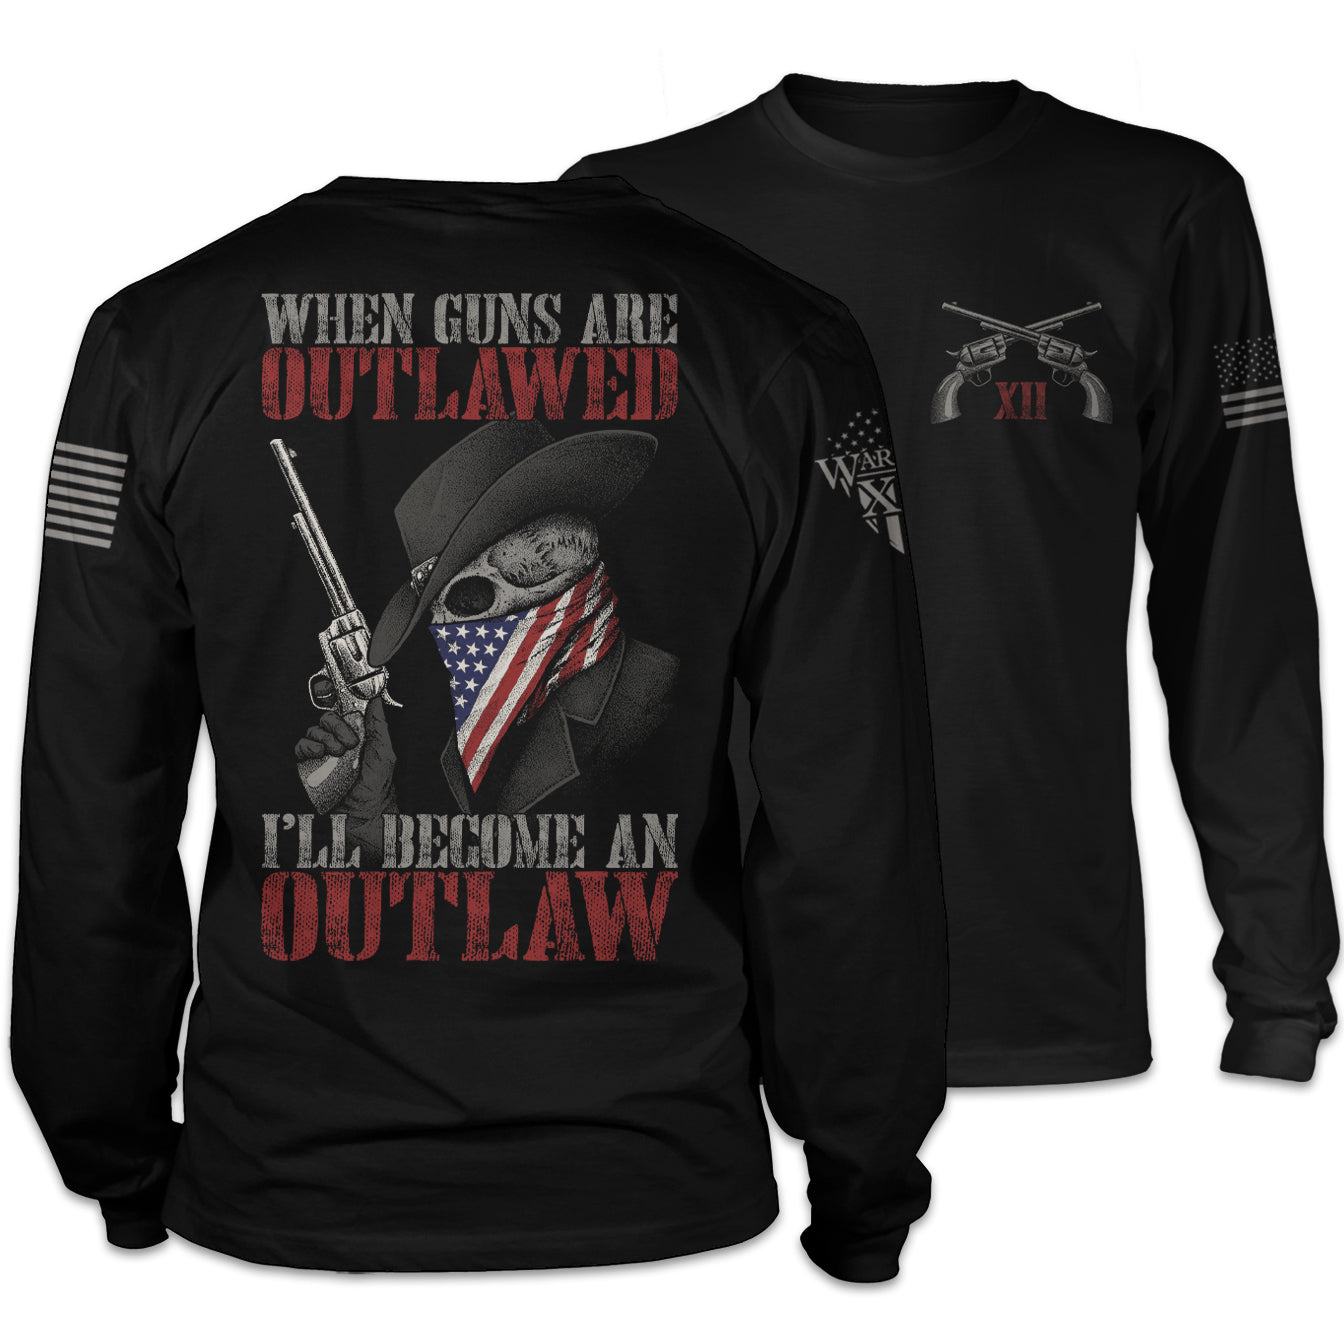 Front & back black long sleeve shirt with the words "When guns are outlawed, I'll become an outlaw" with skeleton holding a gun printed on the shirt.